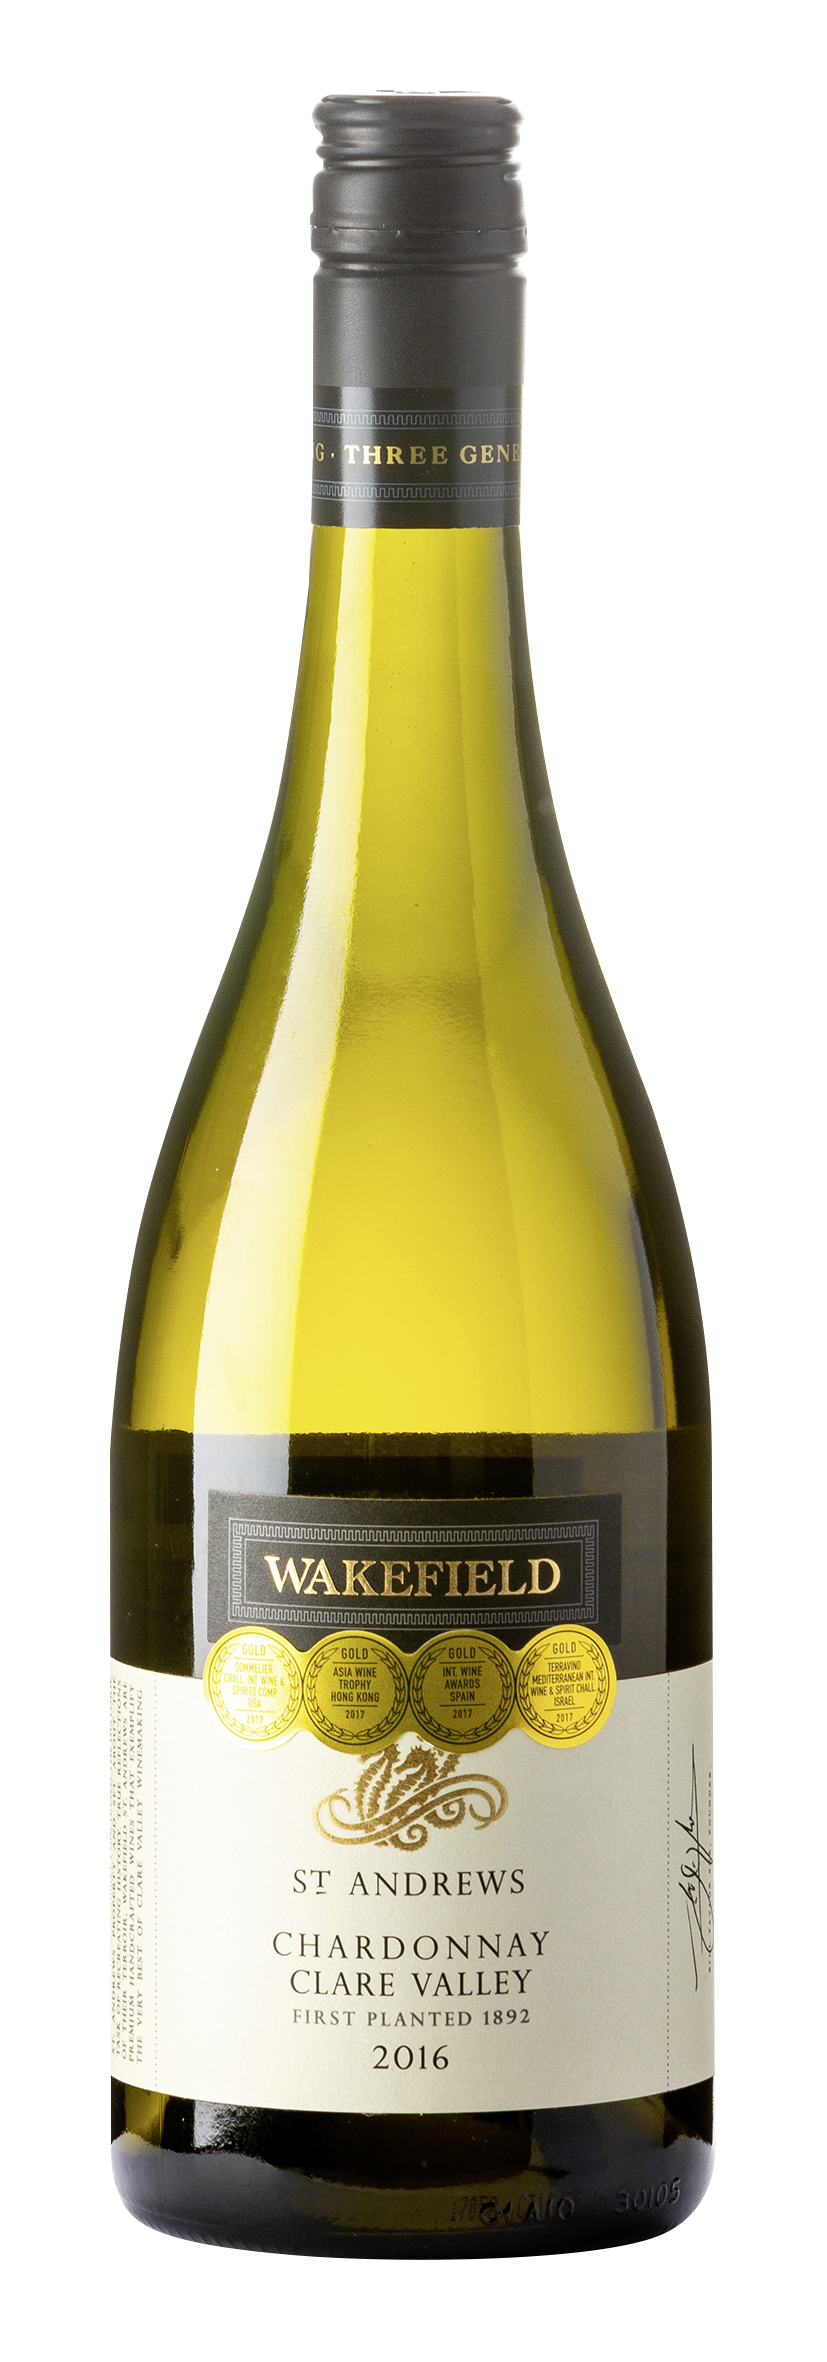 Clare Valley St. Andrews Chardonnay Wakefield 2016